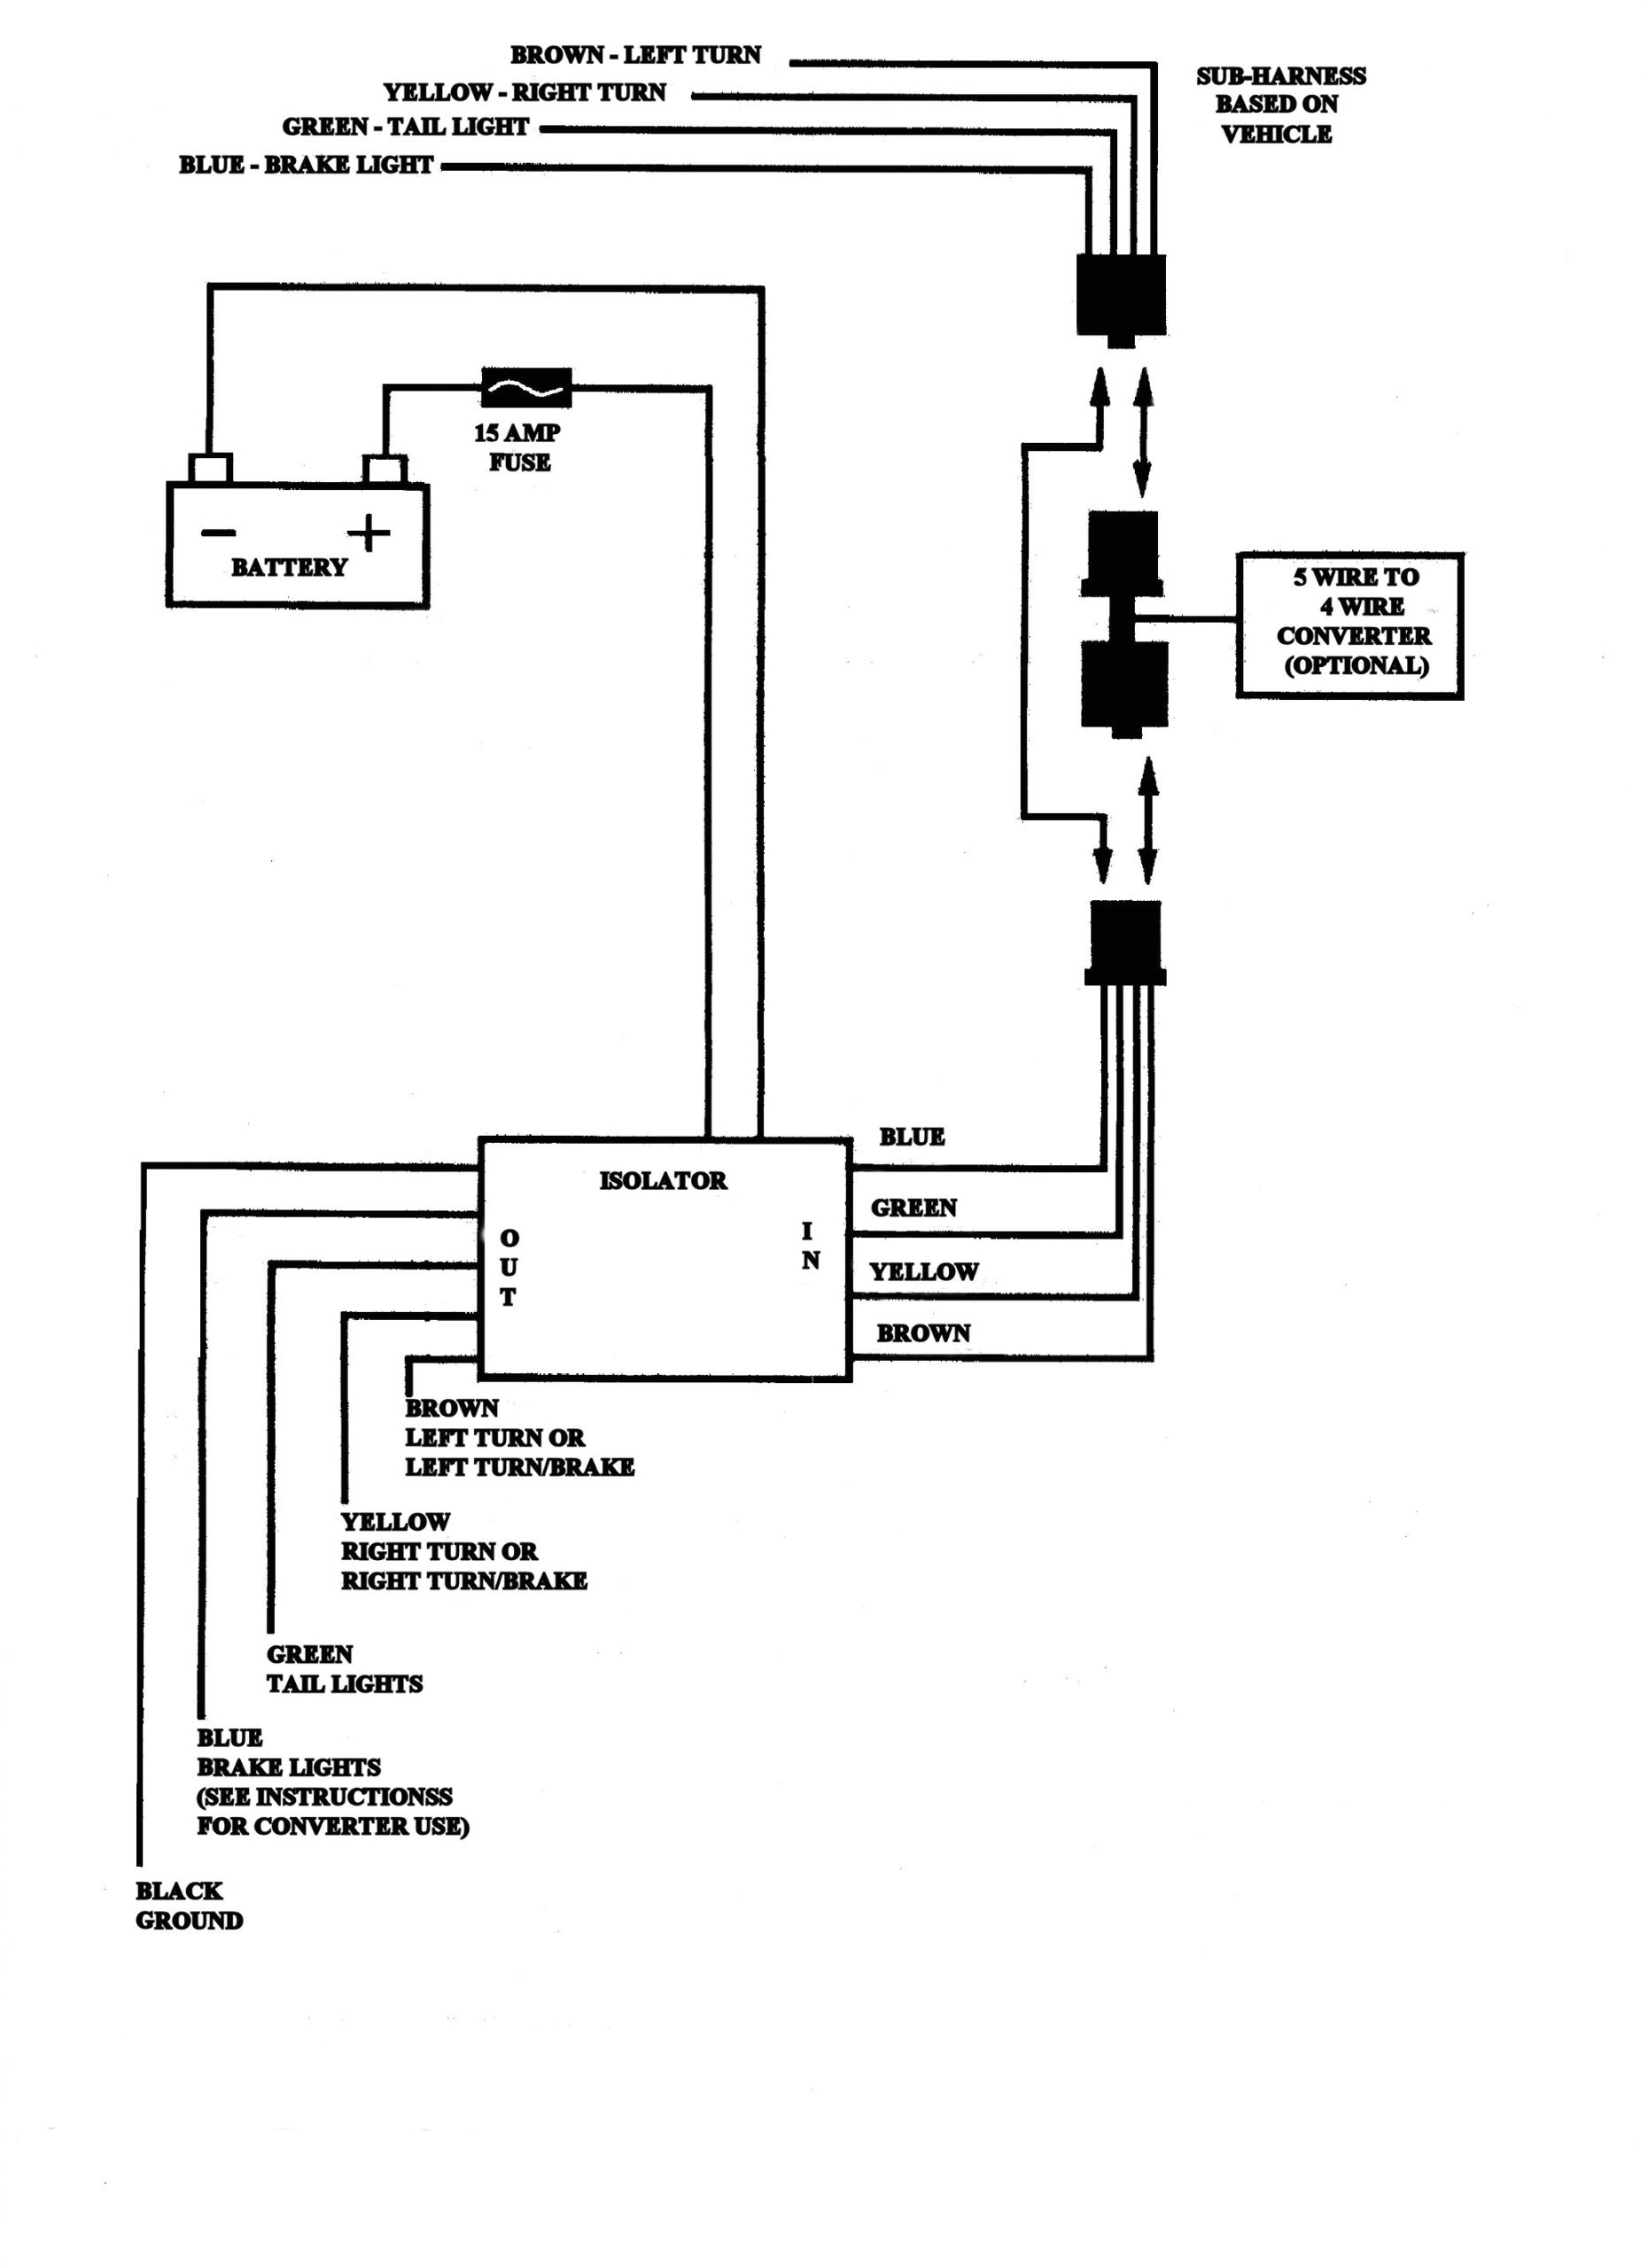 5 wire trailer wiring diagram troubleshooting